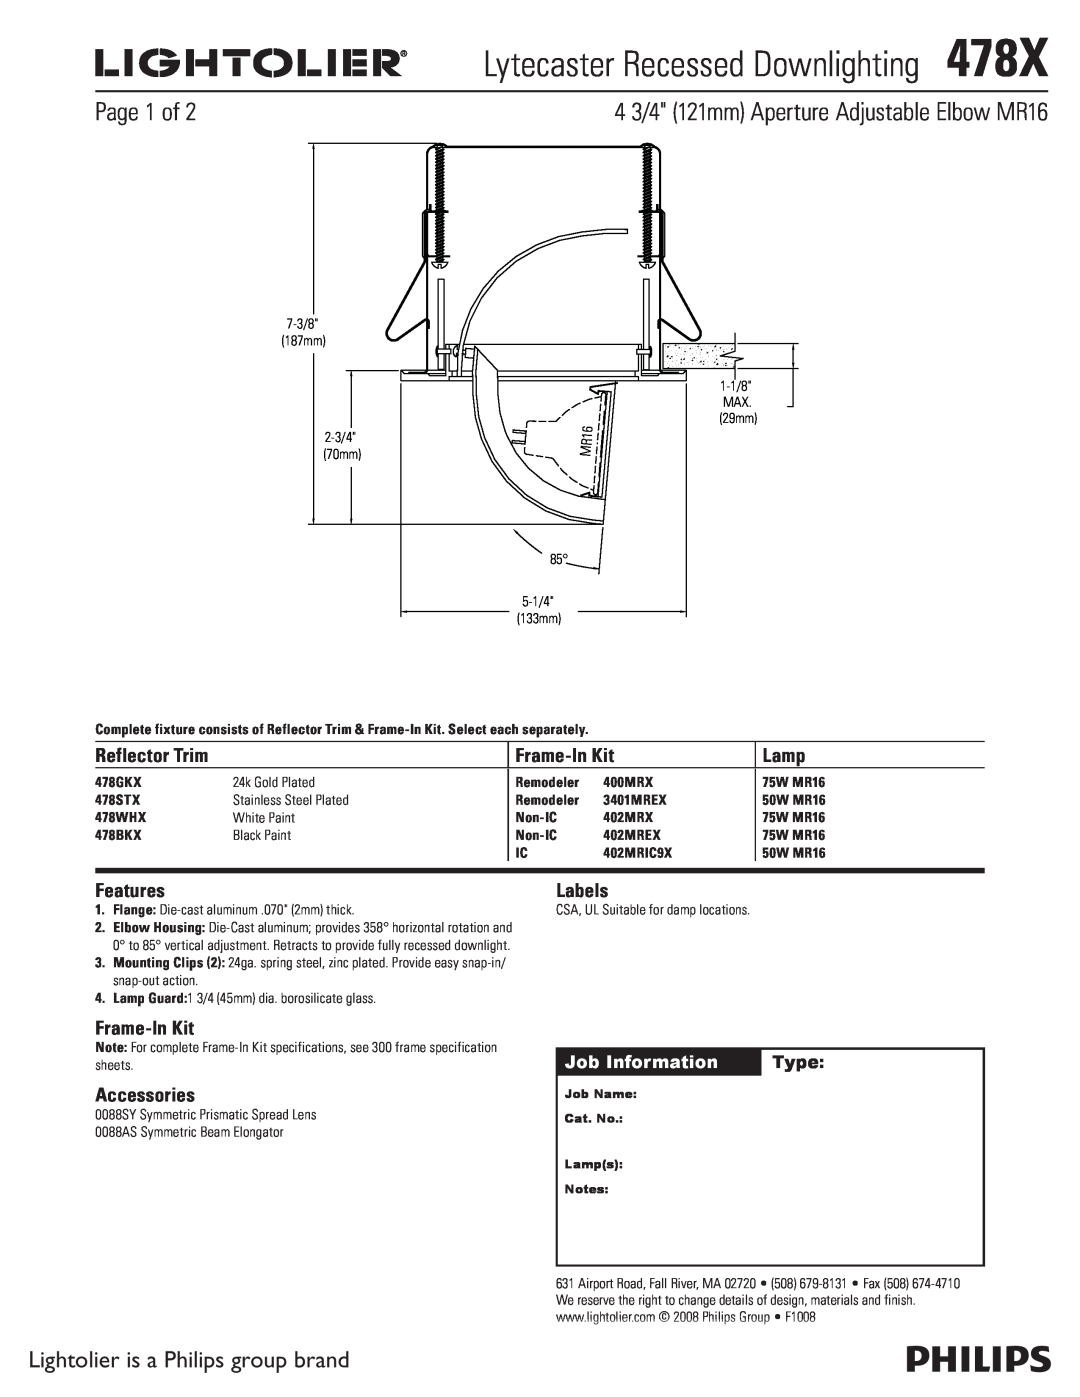 Lightolier specifications Lytecaster Recessed Downlighting478X, 4 3/4 121mm Aperture Adjustable Elbow MR16, Page 1 of 